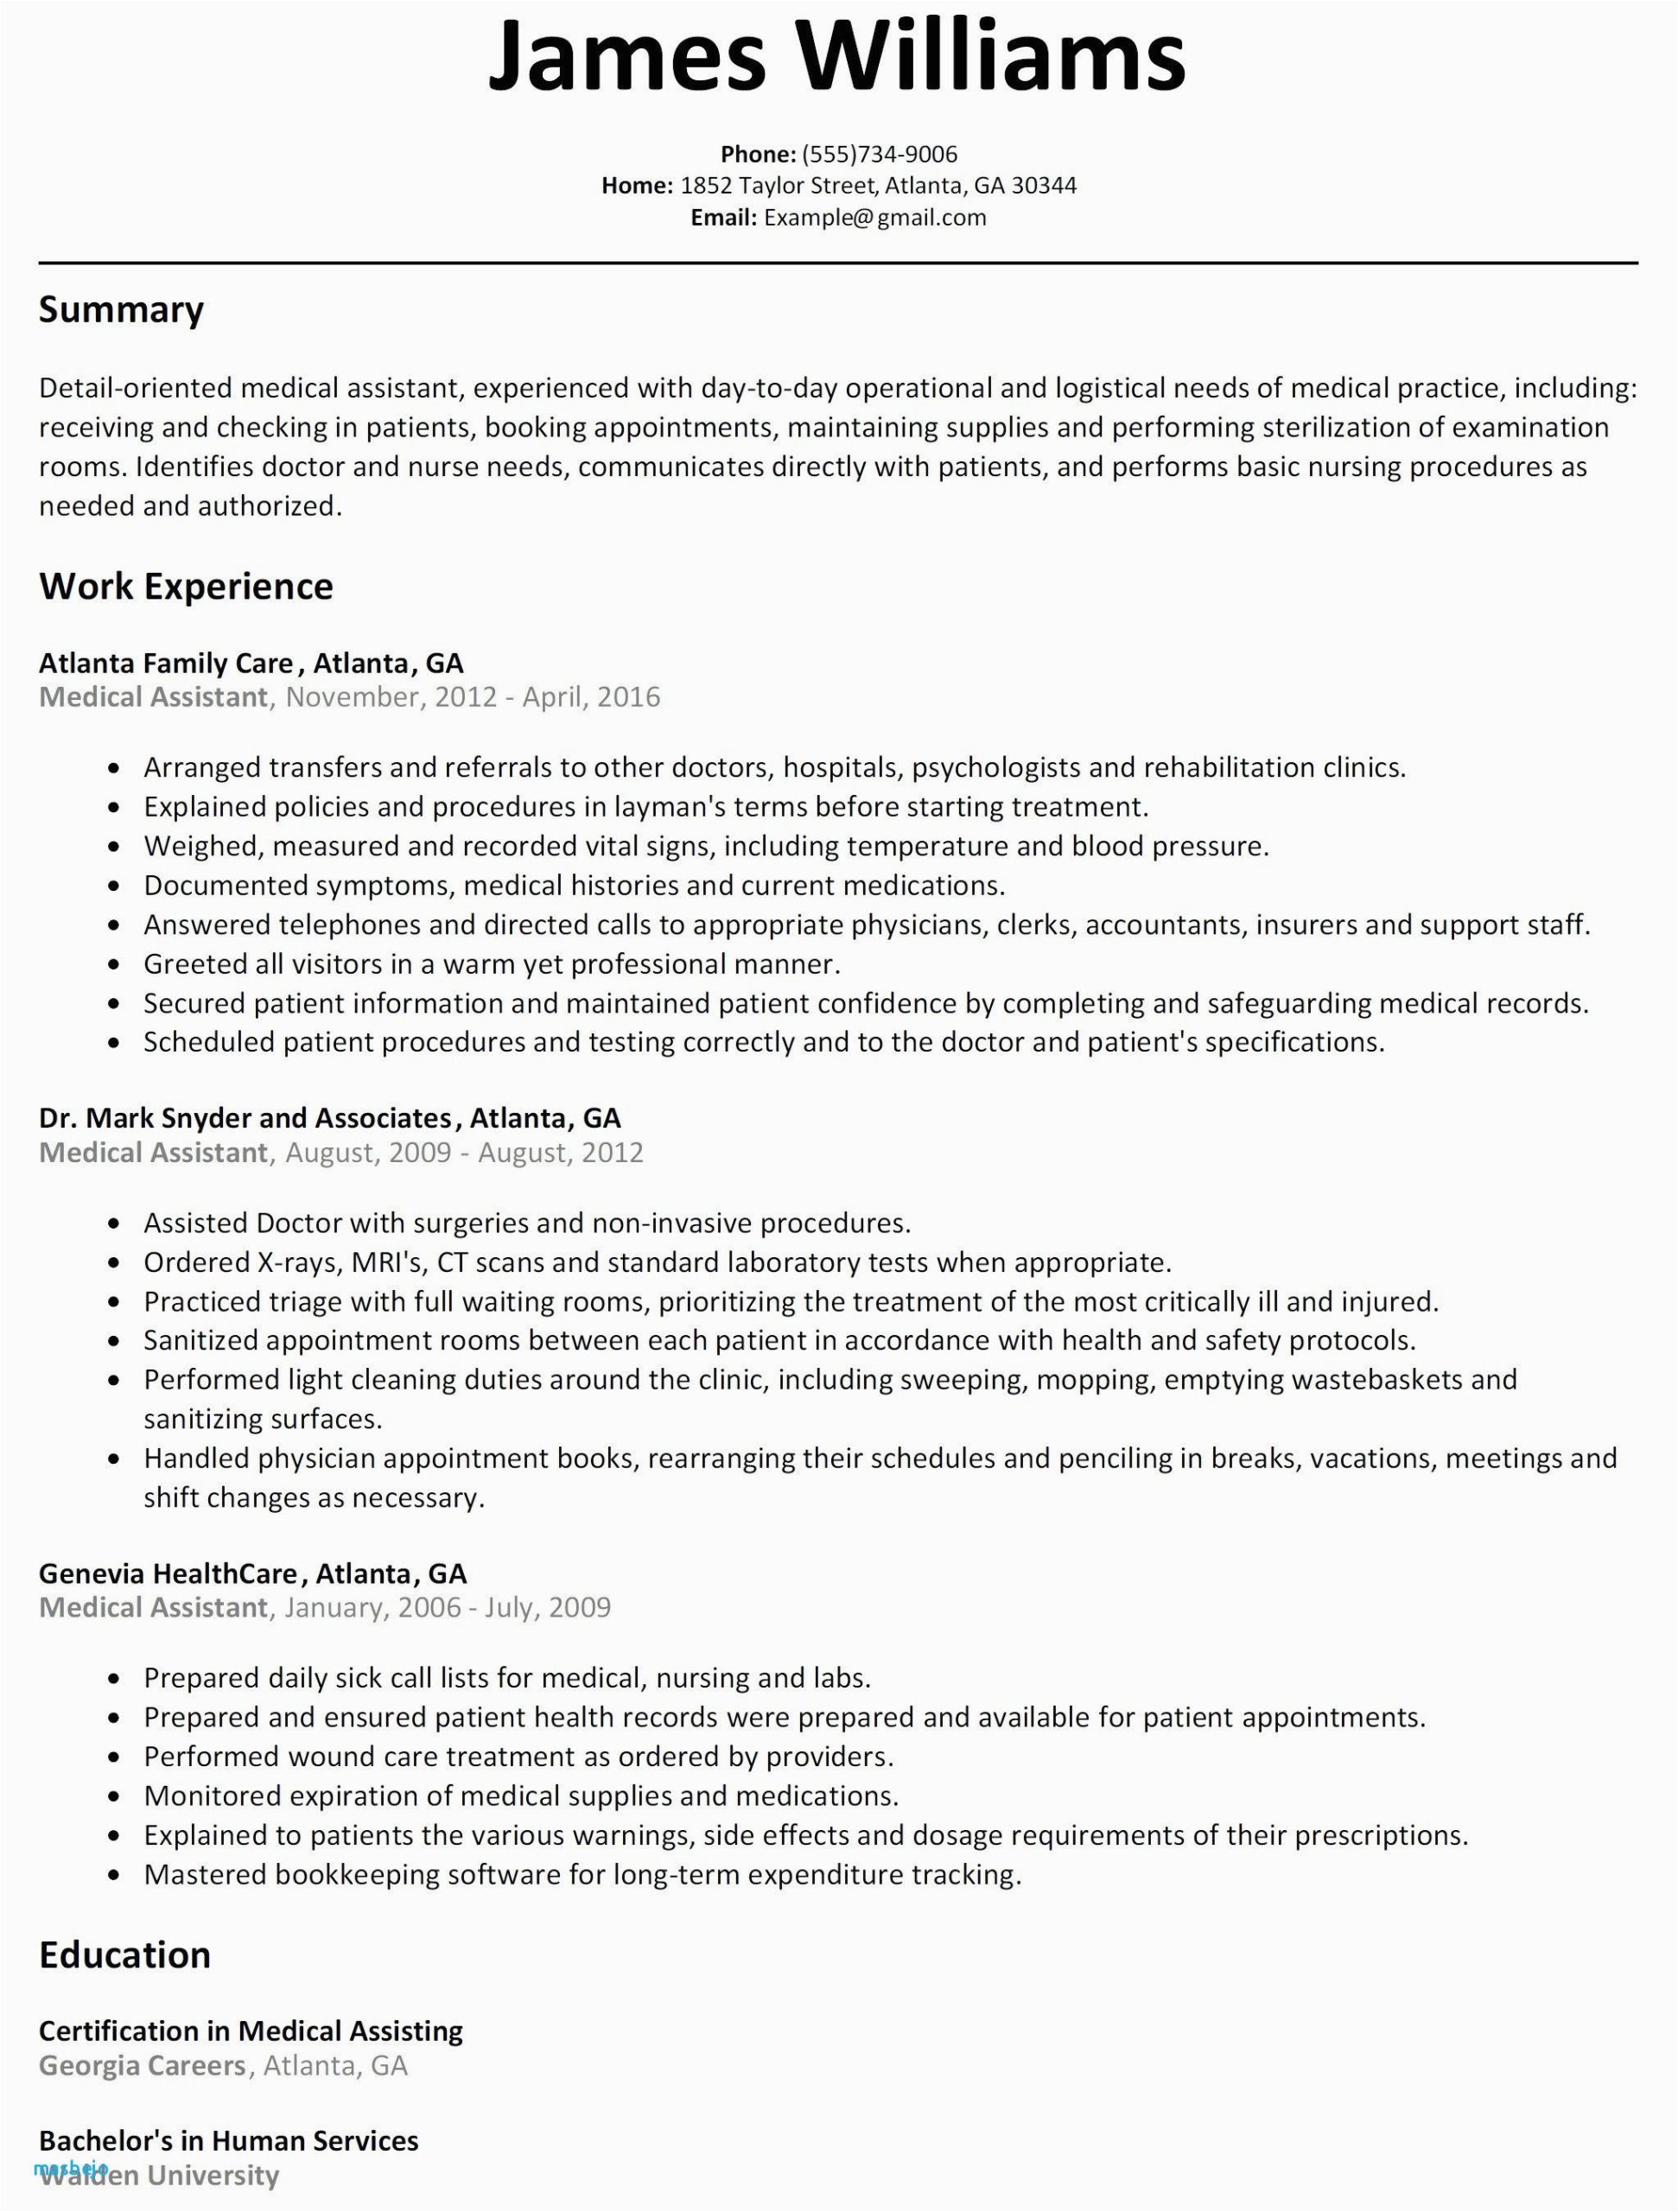 Sample Professional Summary for Resume with No Experience 68 Beautiful S Resume Examples for Medical assistant with No